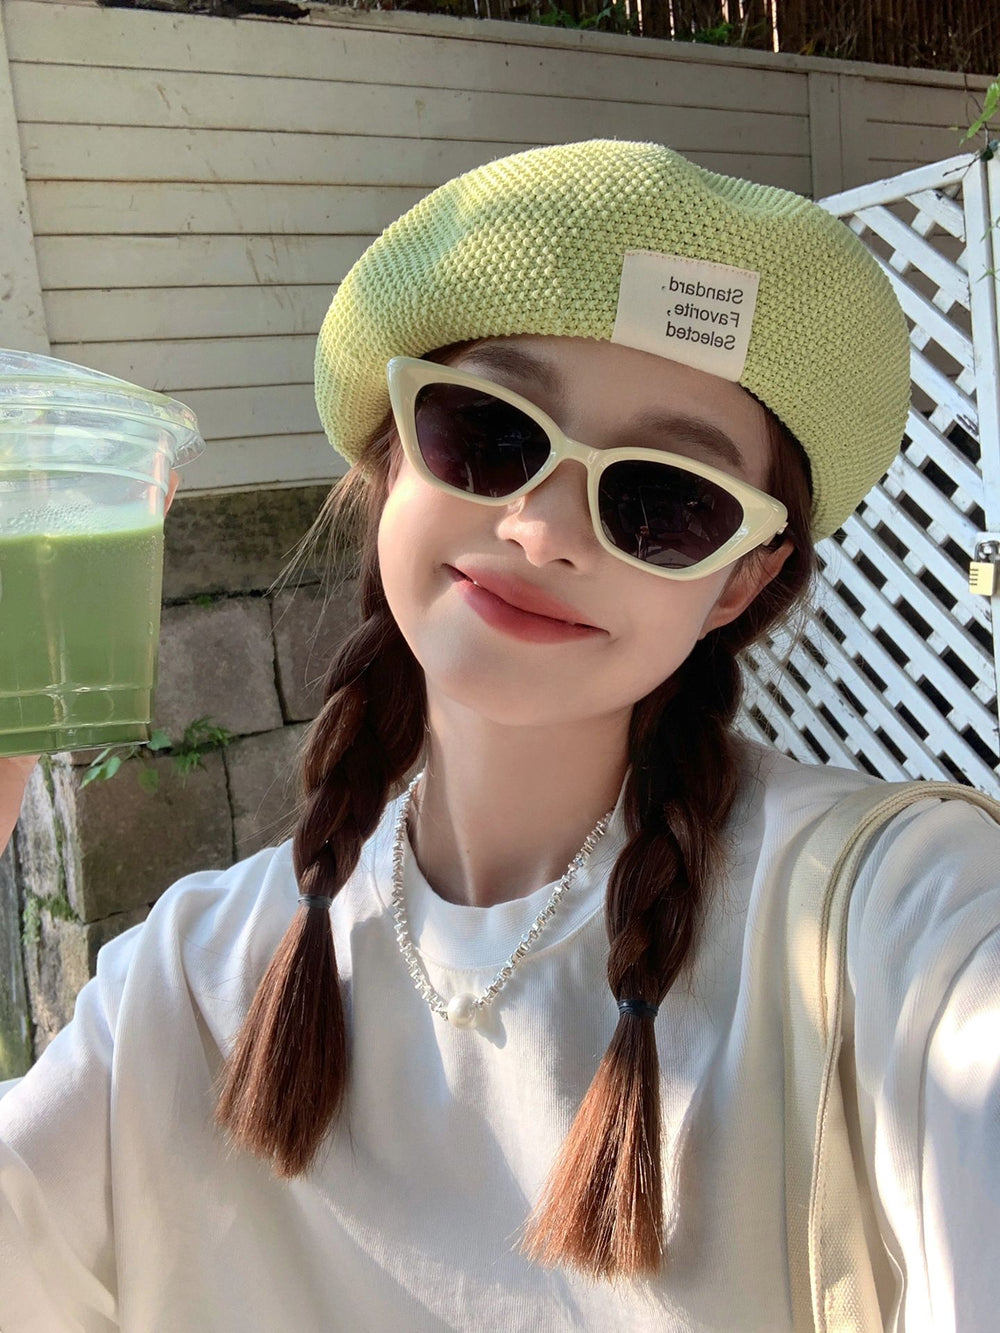 Behold the epitome of health and style! A chic woman donning sunglasses and a hat, sipping on a refreshing green smoothie. 